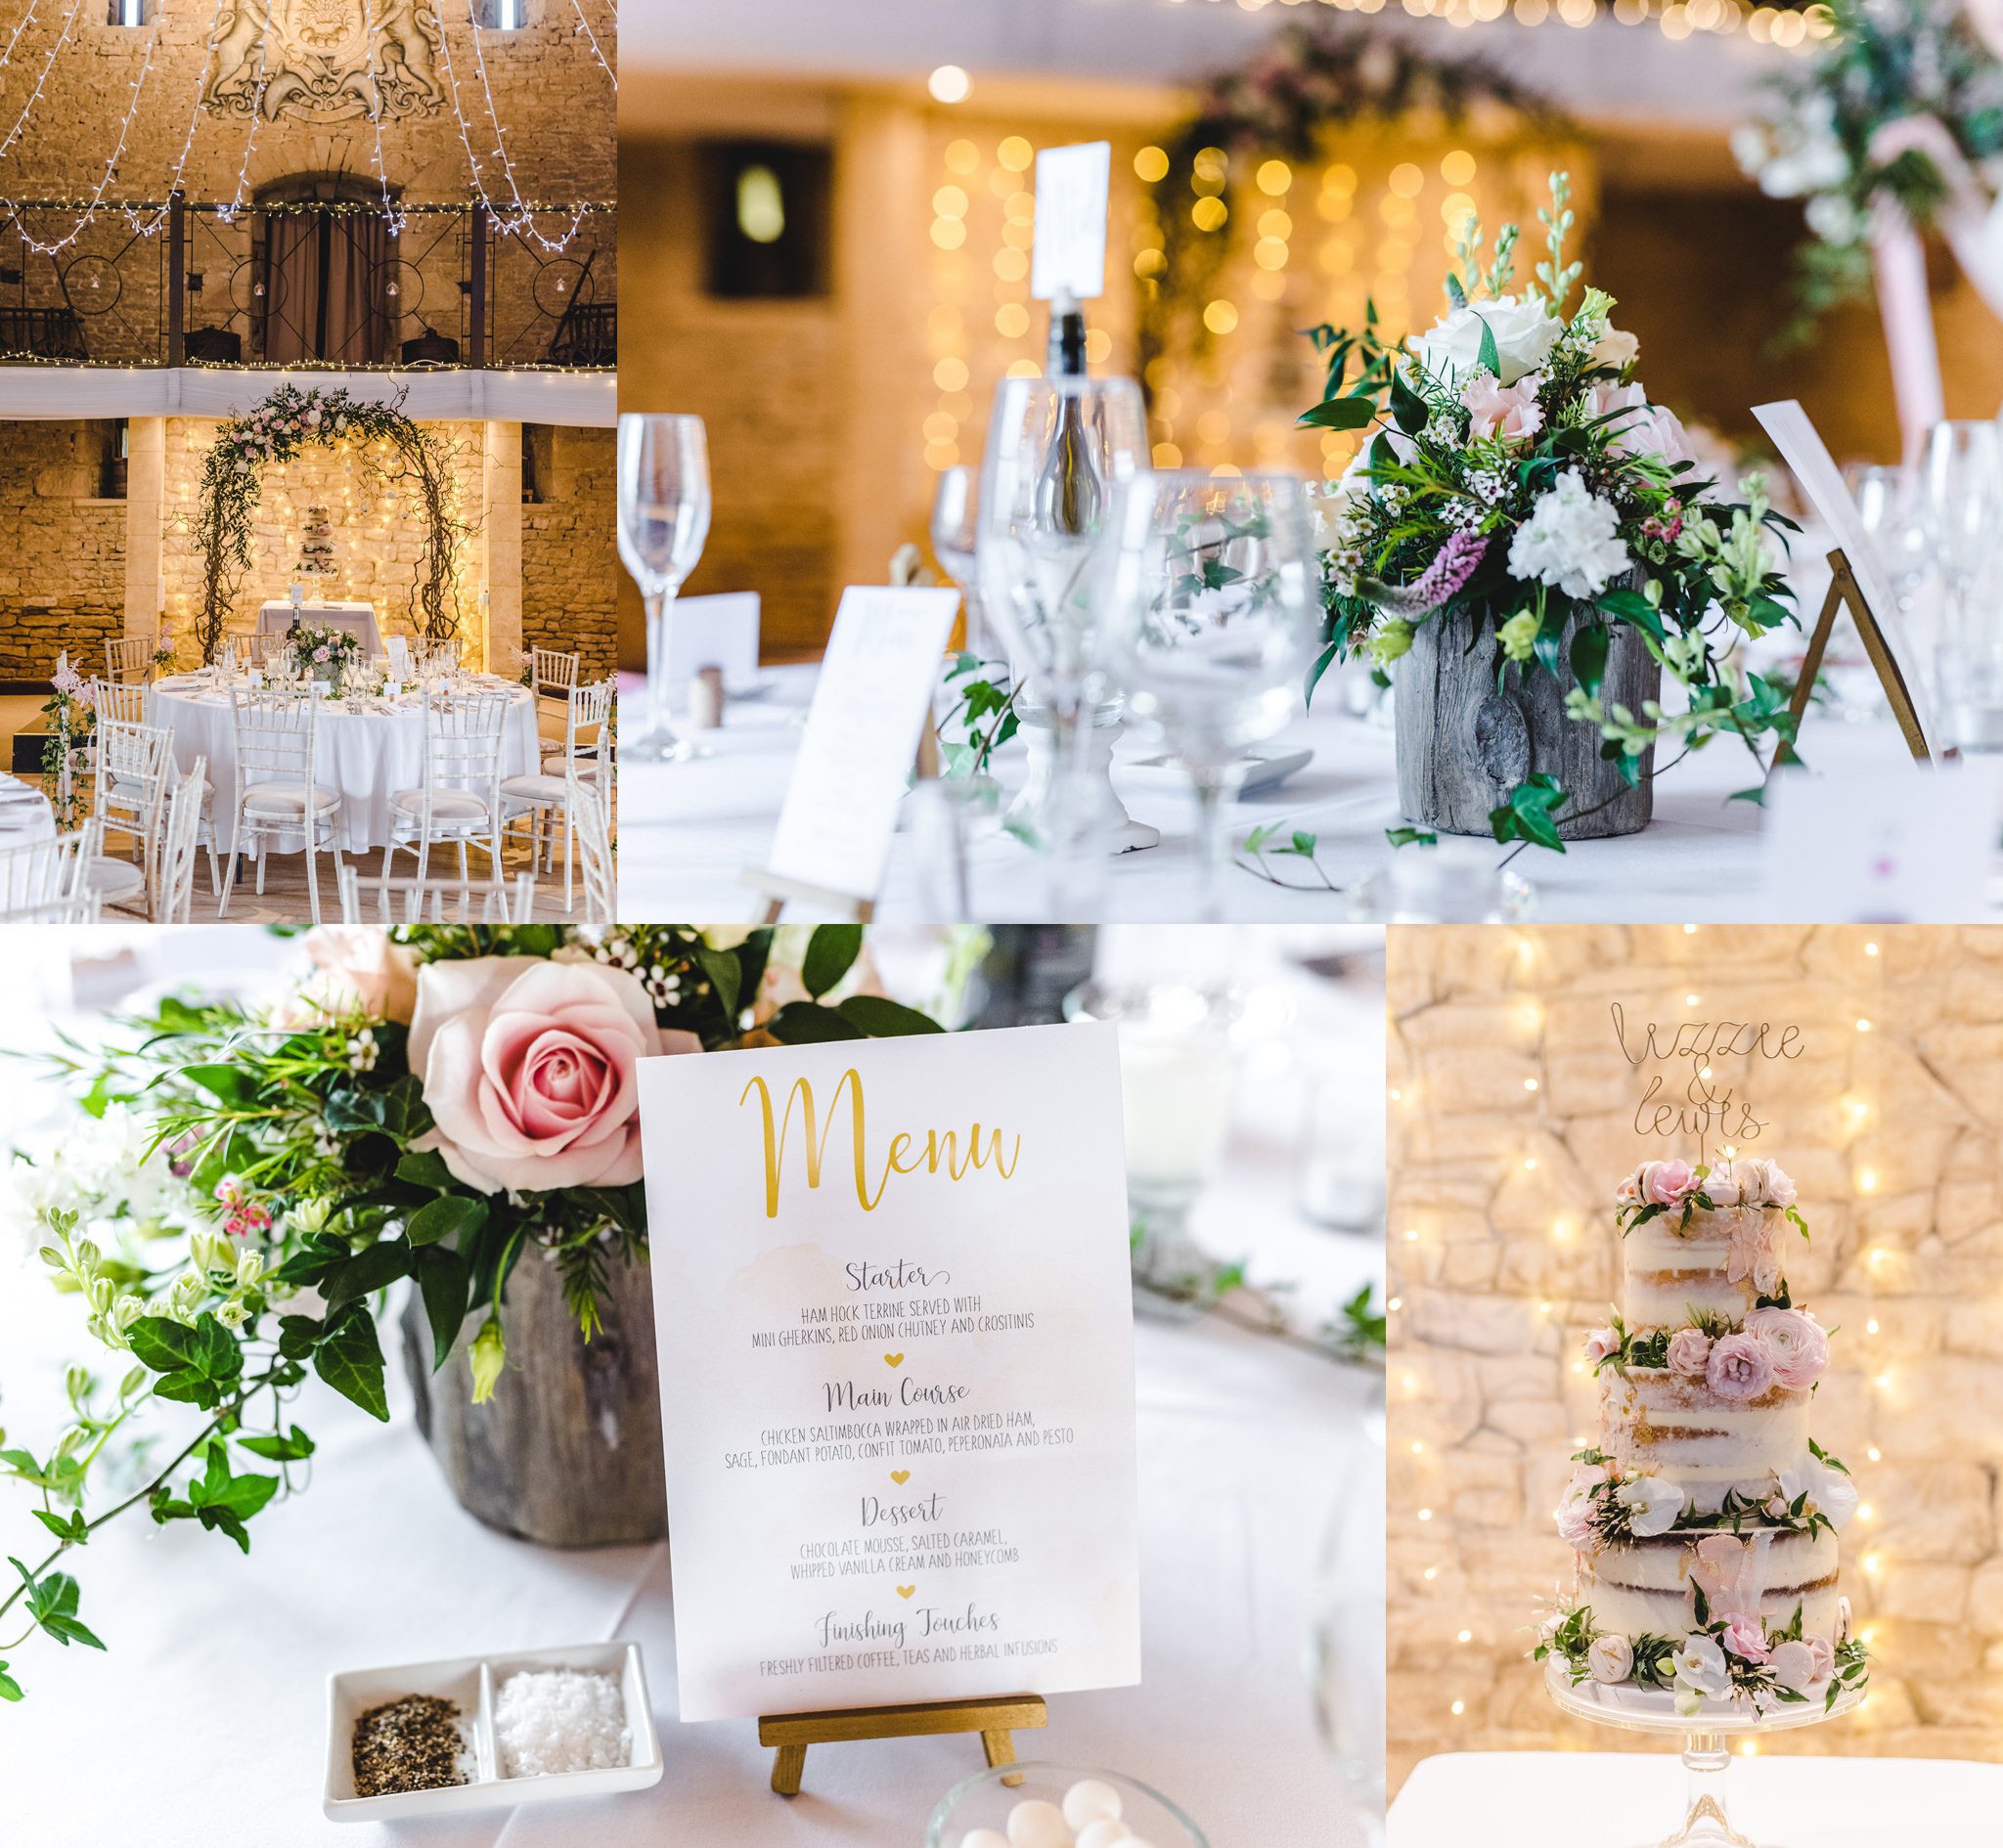 Wedding breakfast styling set up at the great tythe barn